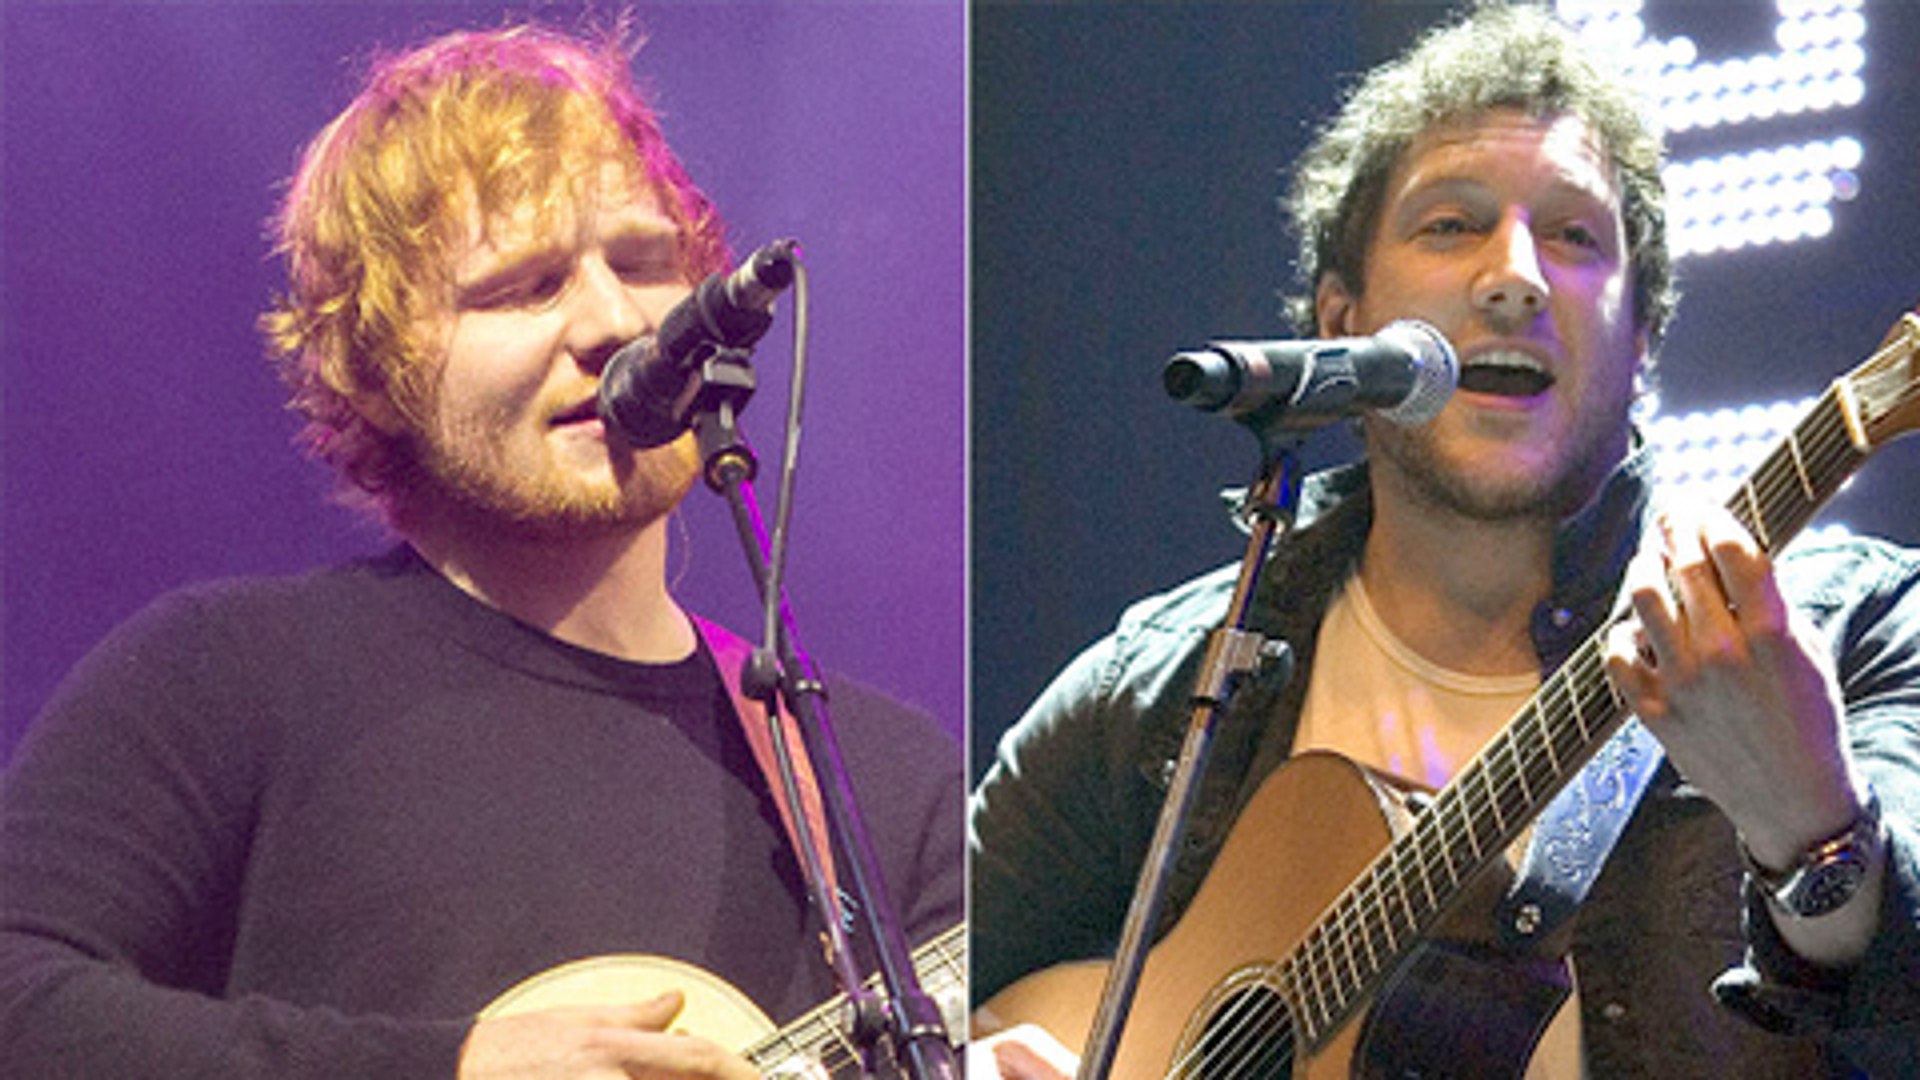 Ed Sheeran SUED for $20M, Steals Song 'Photograph'